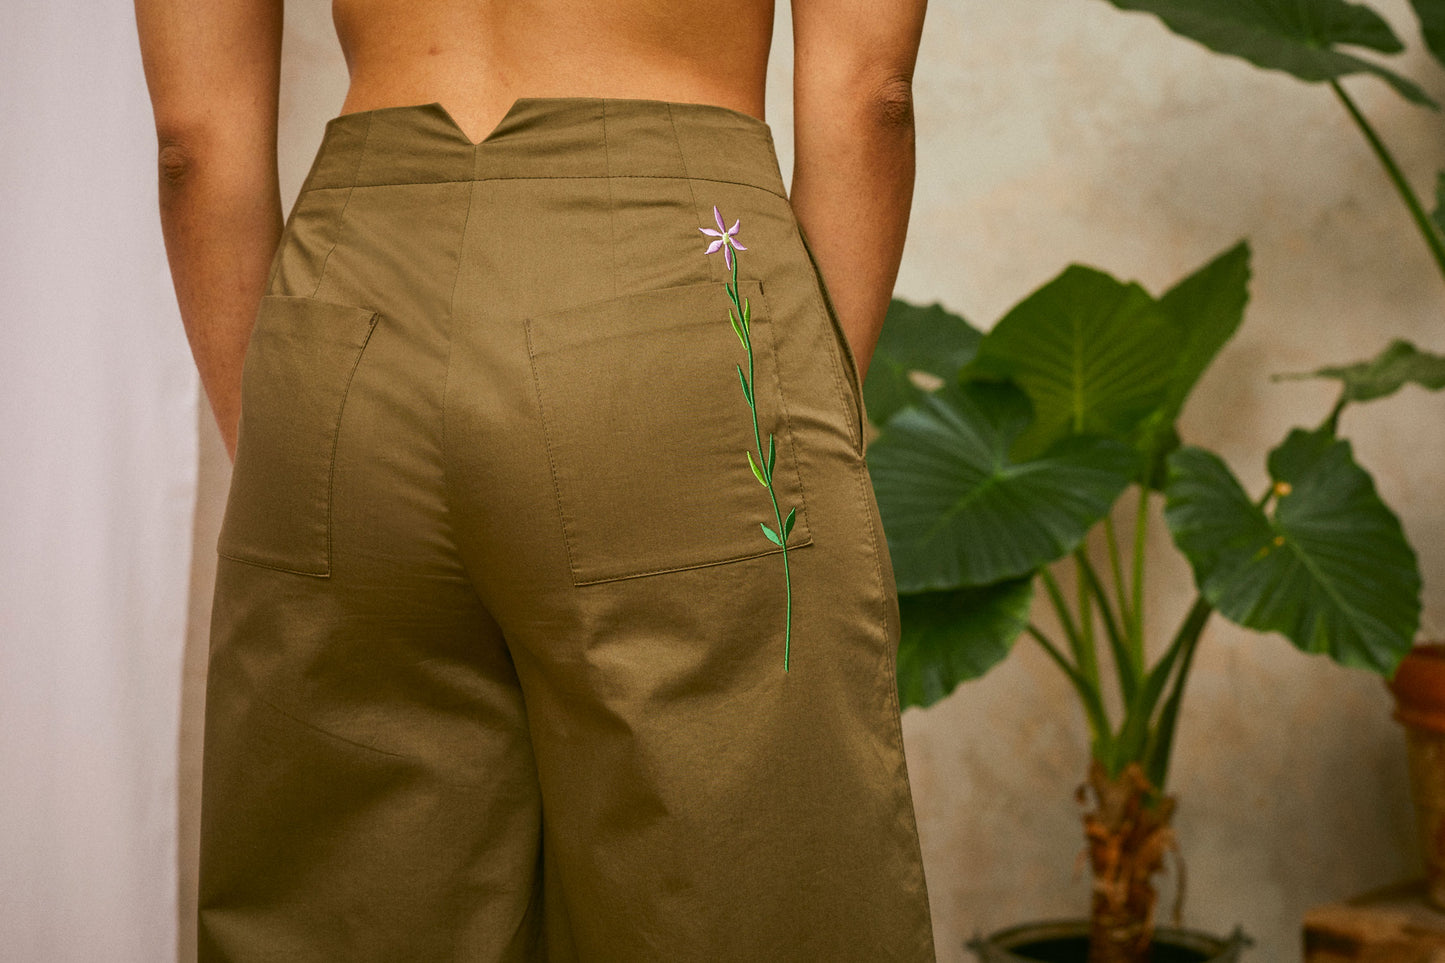 Cropped image of models wearing Saywood's Amelia khaki wide leg trouser; back waist view  showing patch pockets and Saywood signature flower embroidery in lilac. A plant and drop of pink fabric can be seen in the background.